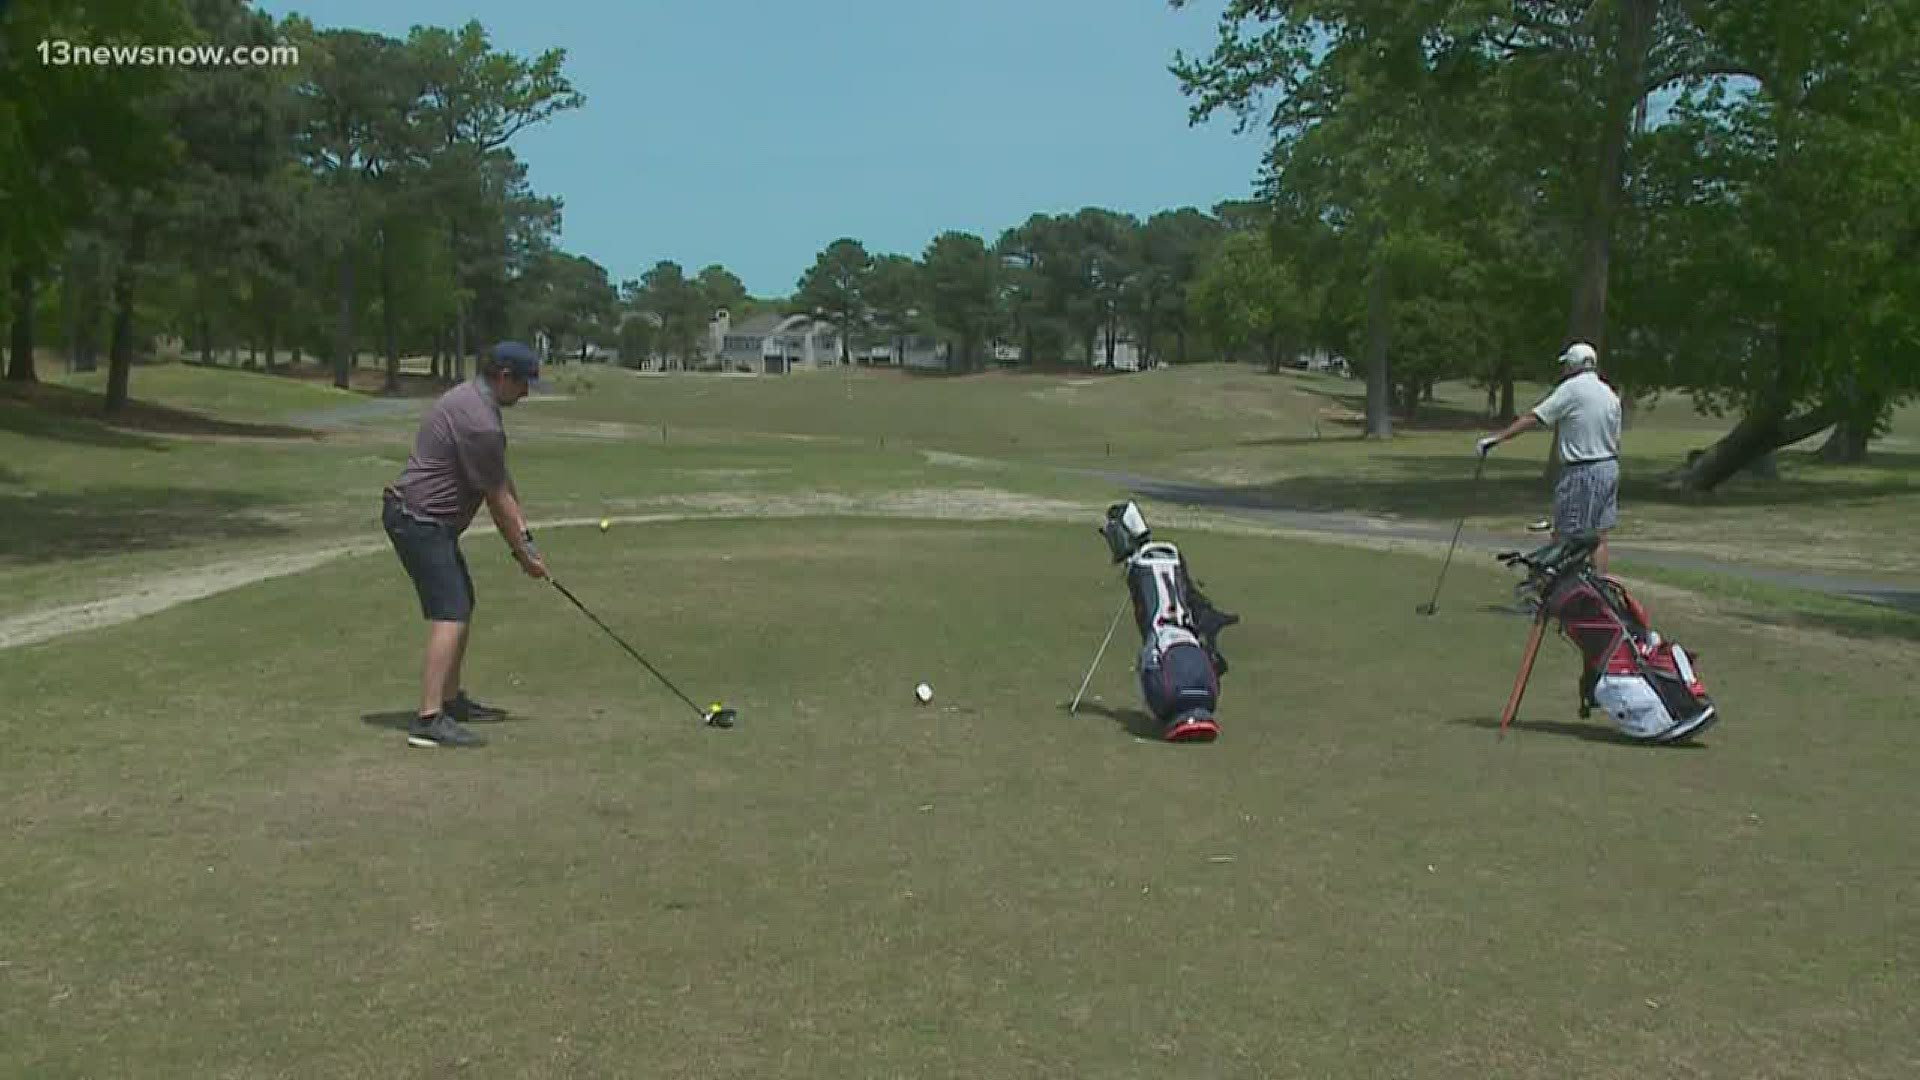 Area golf courses are quite crowded as people find ways to exercise and get out of the house.